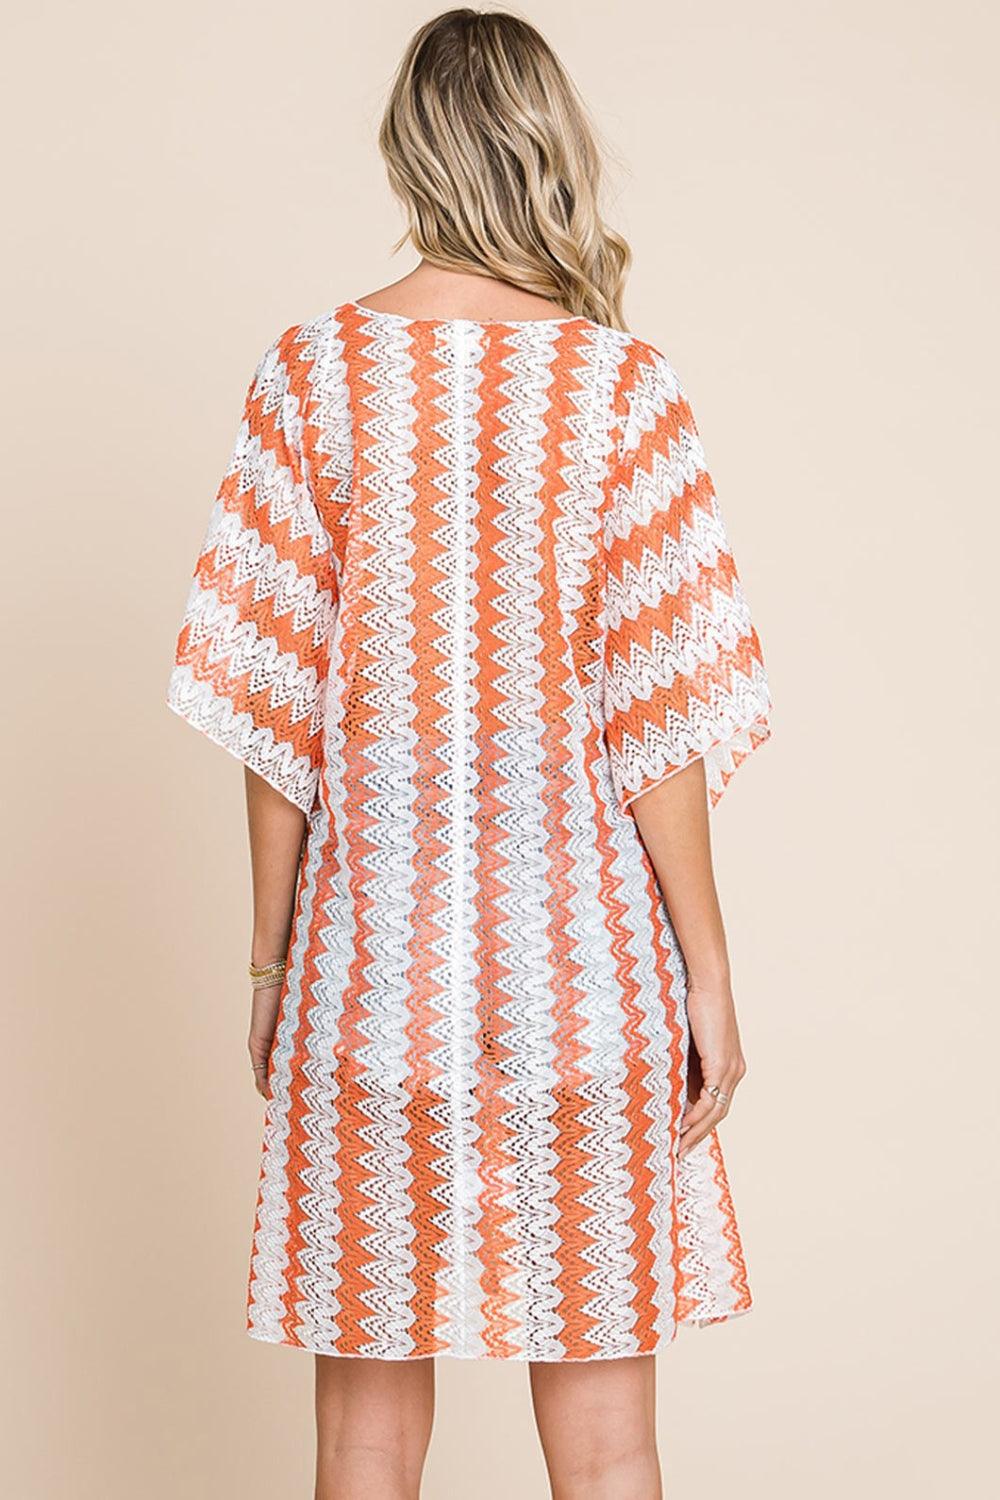 Multi Crochet Lace Cover Up in Orange - Wildflower Hippies